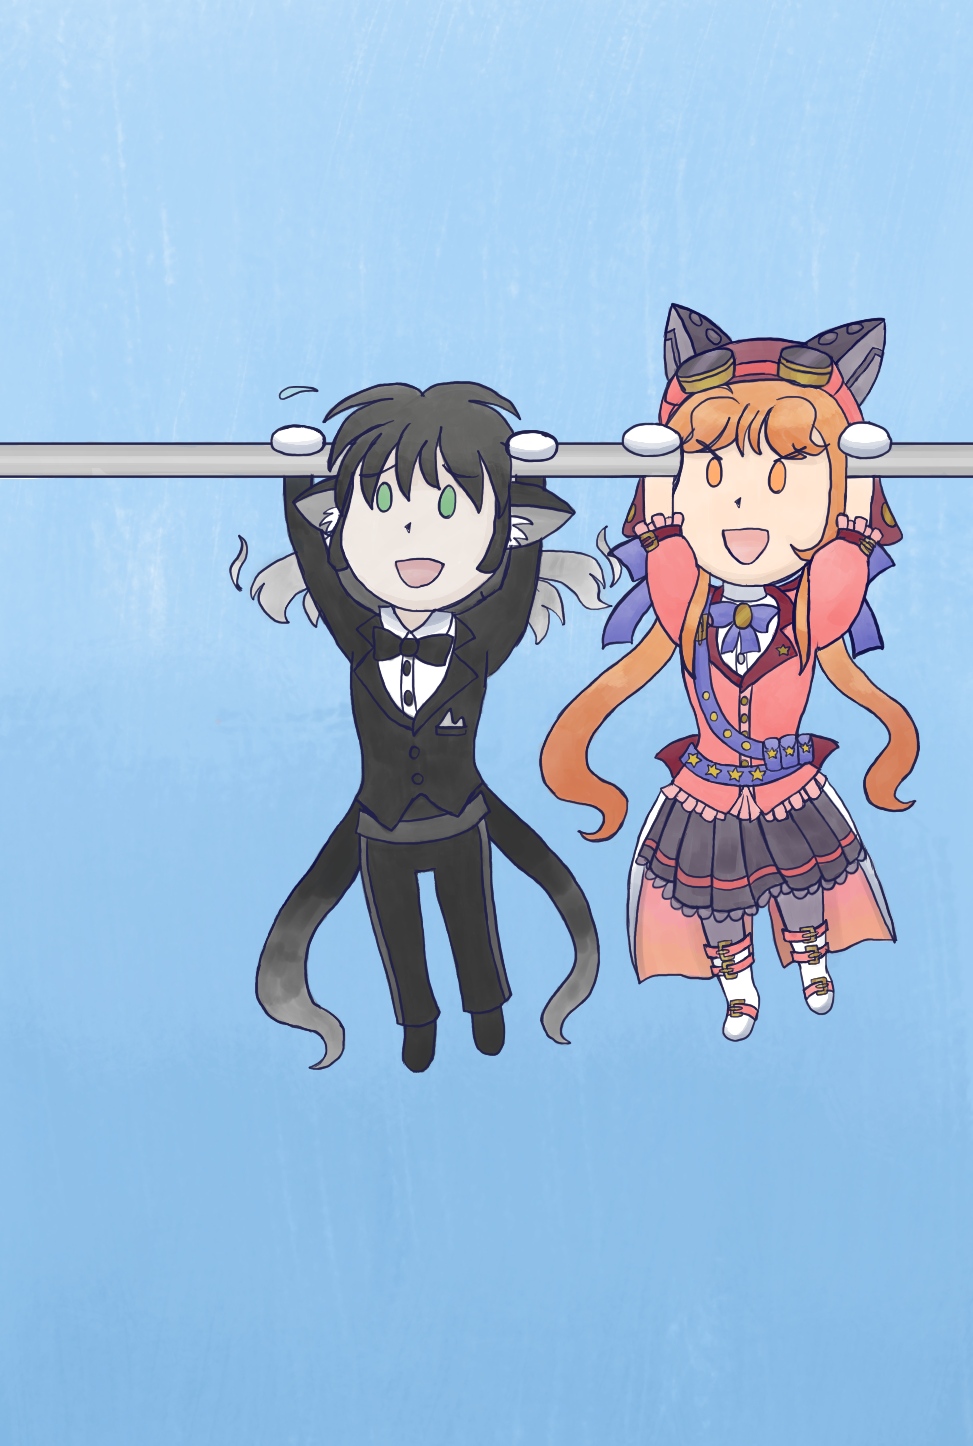 Image description: A pastel digital drawing of a pair of chibi-style characters hanging from a bar. Both of them have cat ears; the person on the left is a long-haired ghostly cat man in a tuxedo and is struggling to hold onto the bar; the person on the right is a woman with a fancy steampunk dress with mechanical cat ears poking through her hat. She has long hair in pigtails and is confidently holding onto the bar.